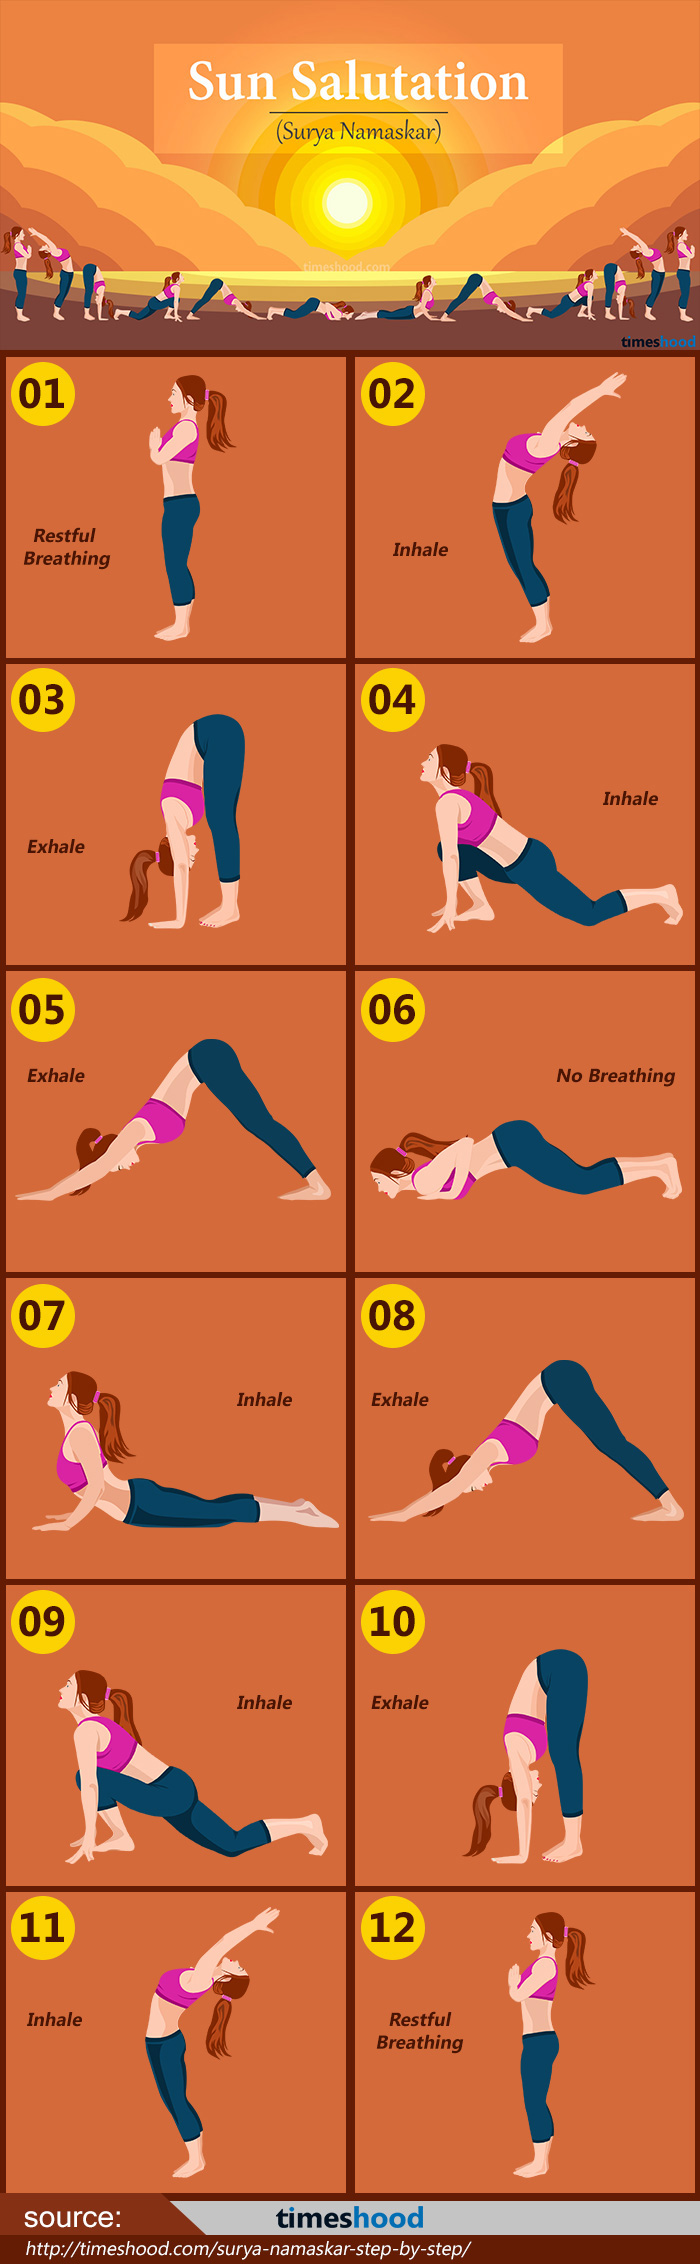 Surya Namaskar (Sun Salutation) Practice Step by Step Every Morning, Best Yoga for morning. Yoga for weight loss